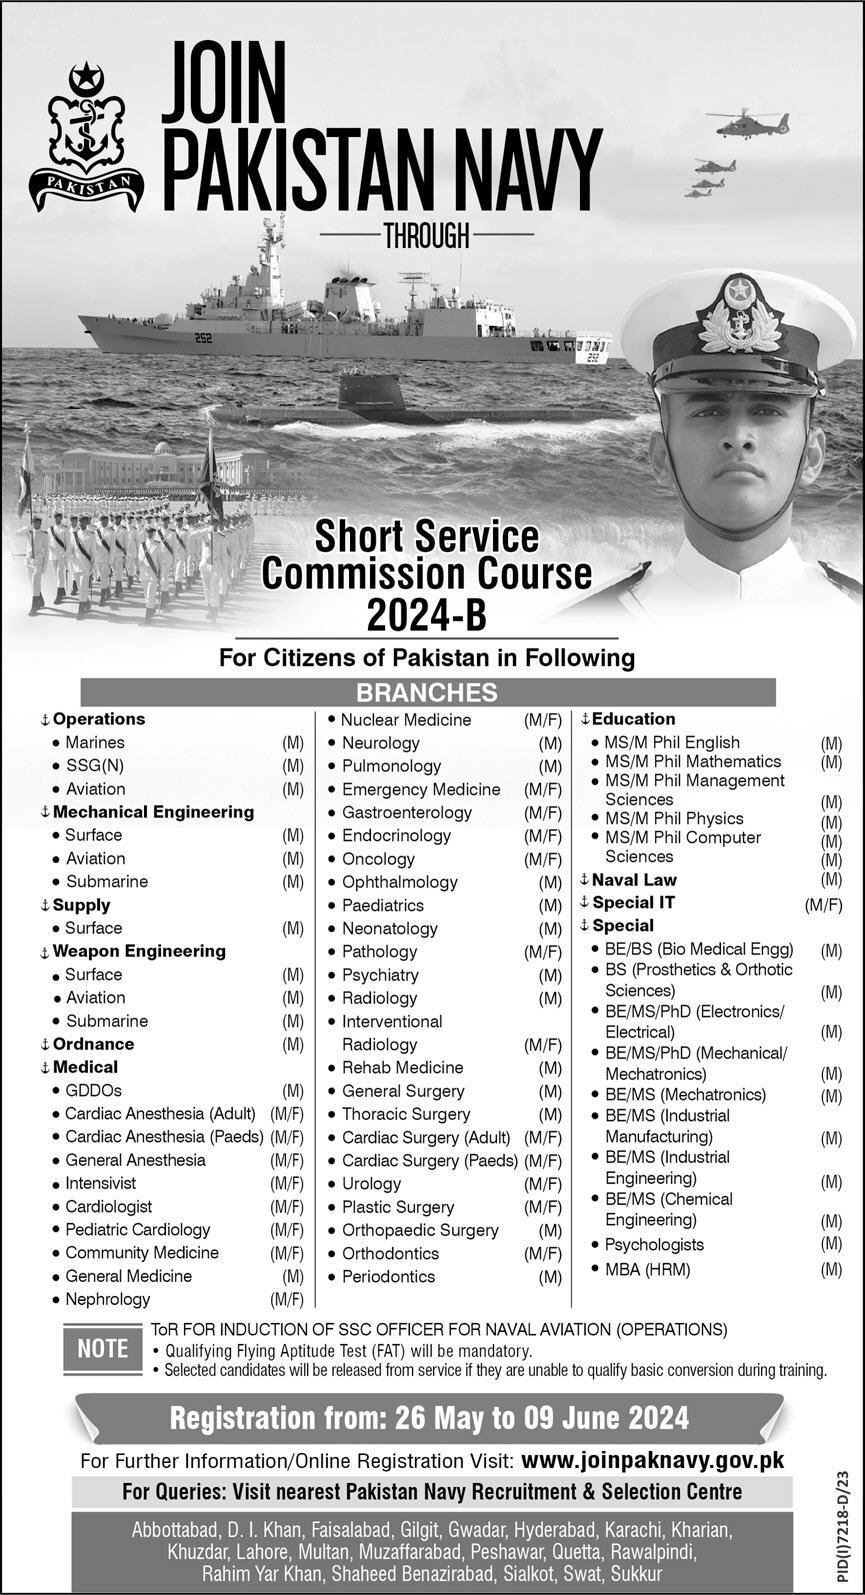 Online Registration to Join Pak Navy through SSCC 2024-B